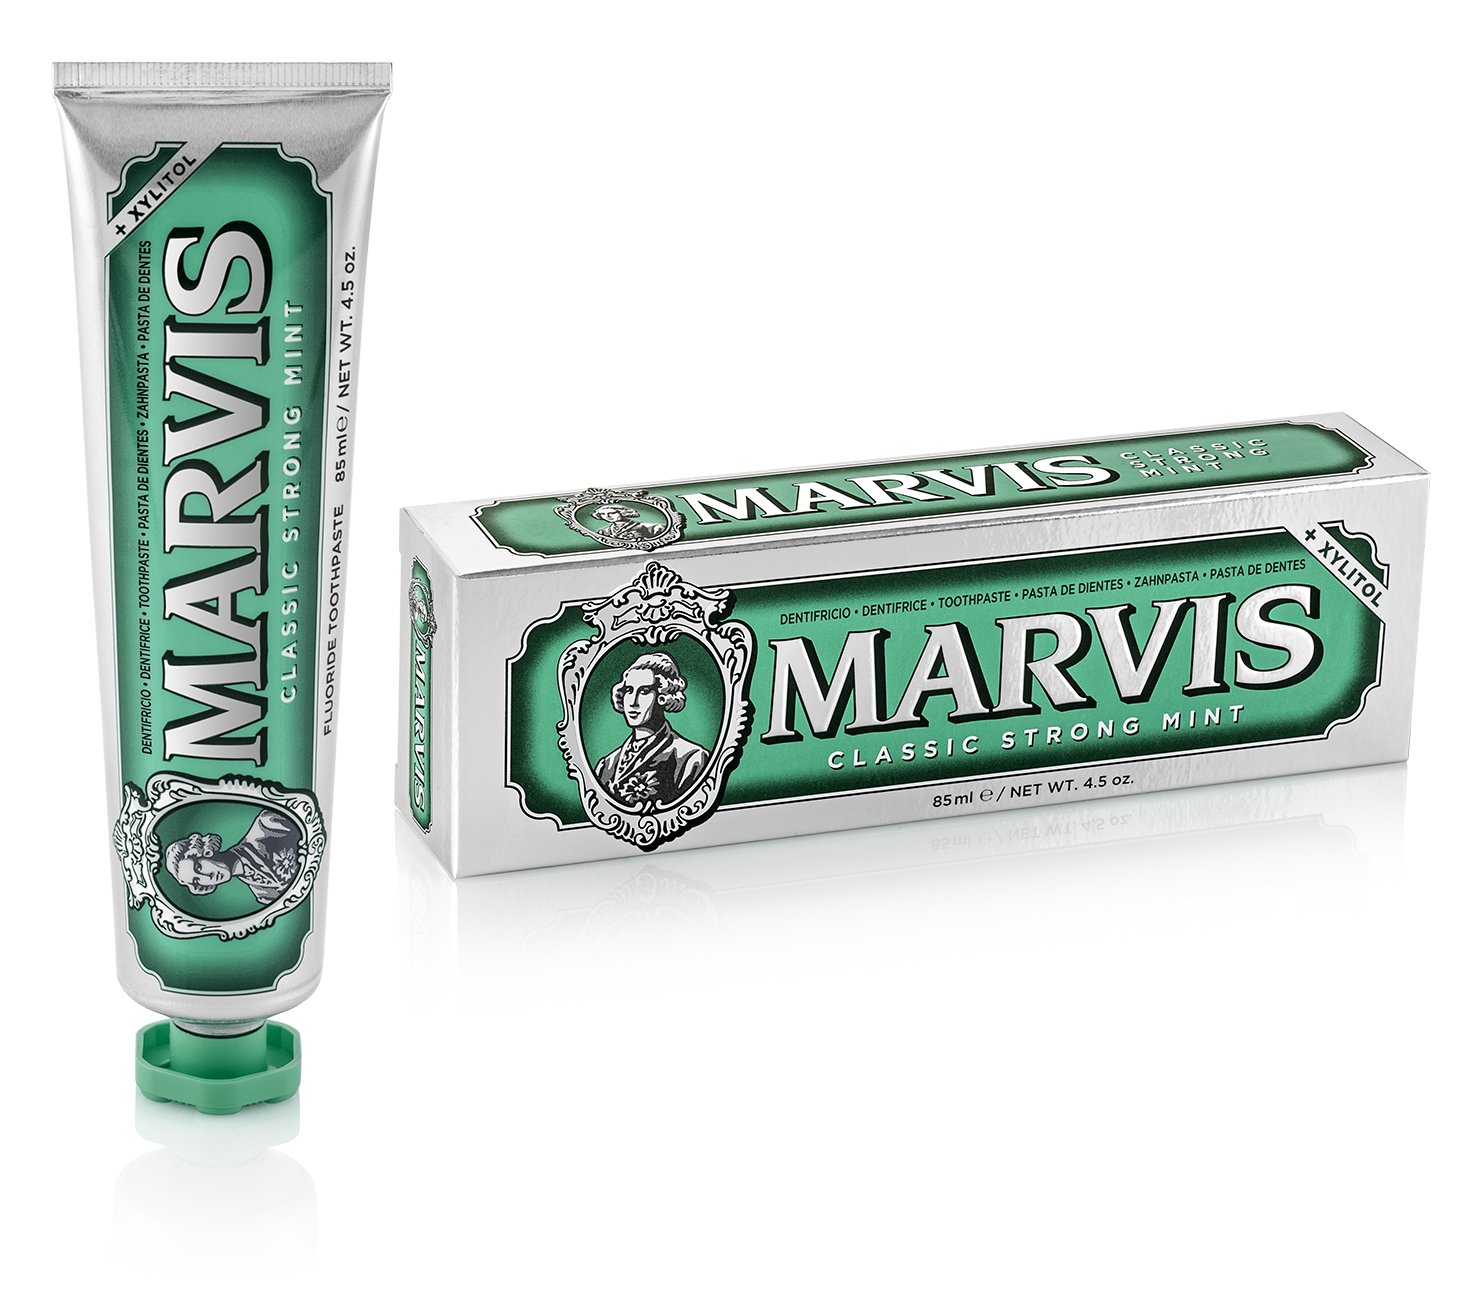 marvis-classic-strong-mint-toothpaste-10